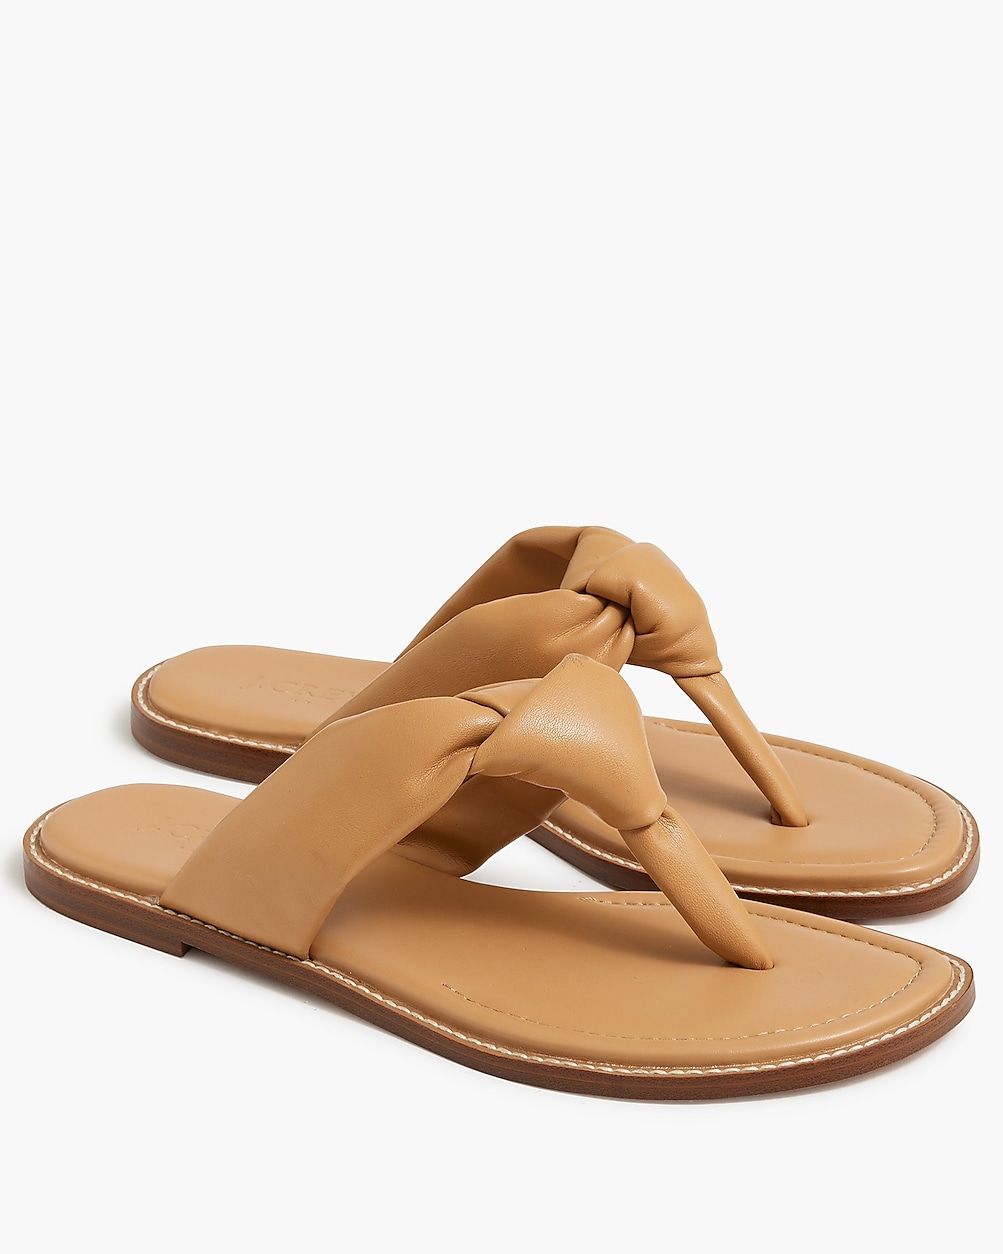 Knotted thong sandals | J.Crew Factory